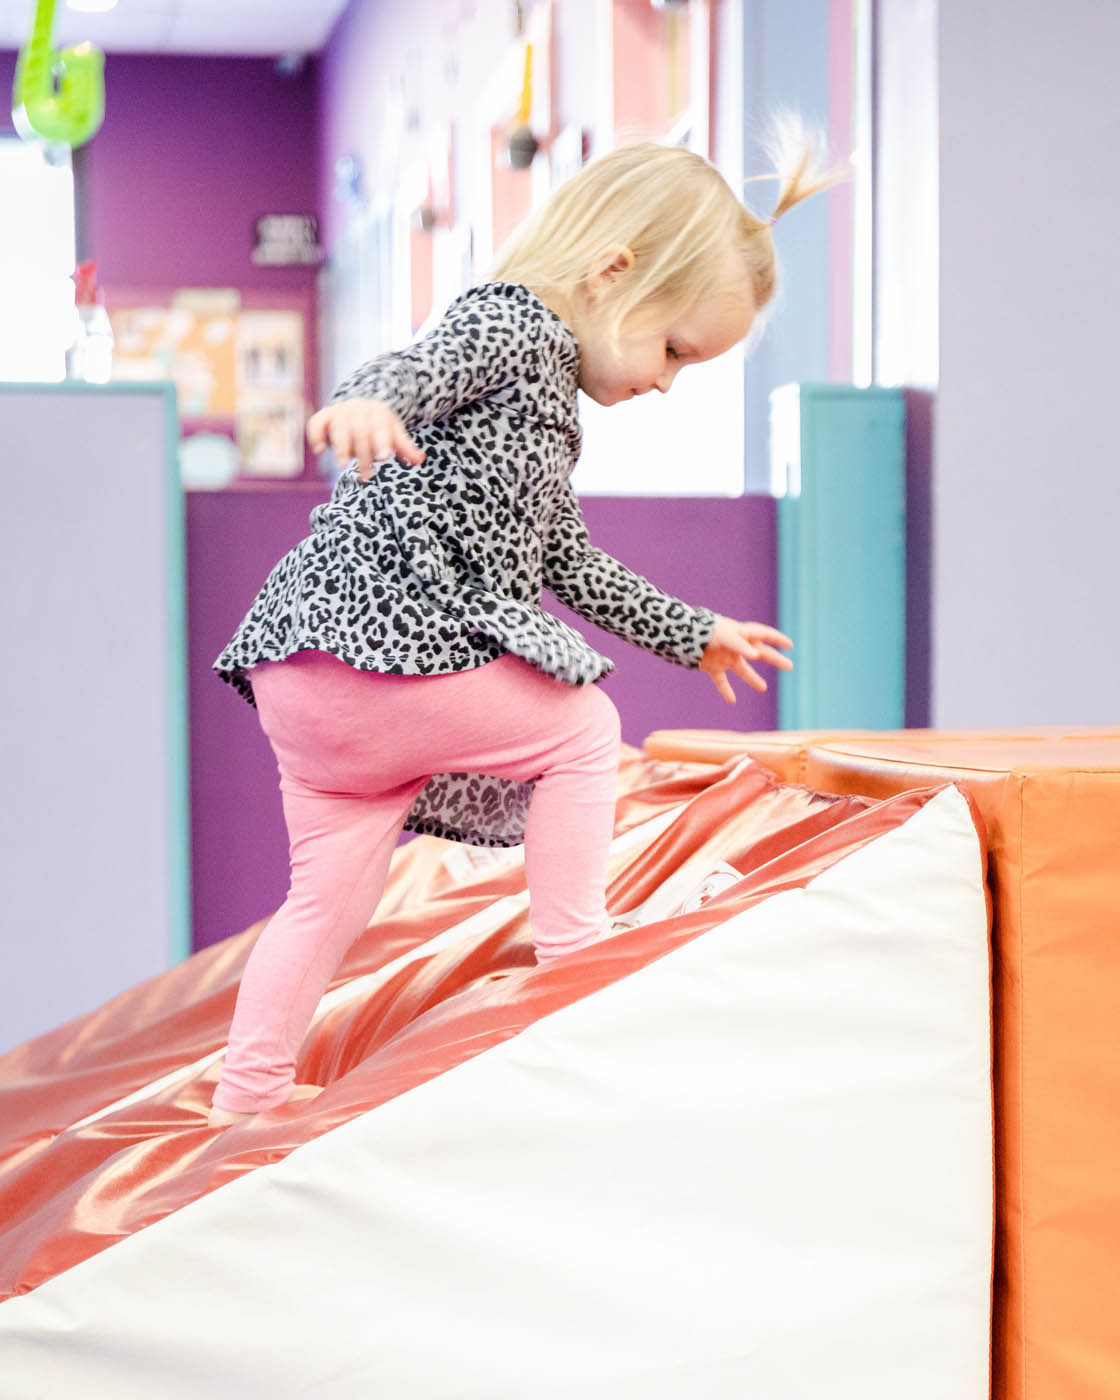 A girl climbing on soft gym equipment for gymnastics for 2 year olds in Raleigh, NC.